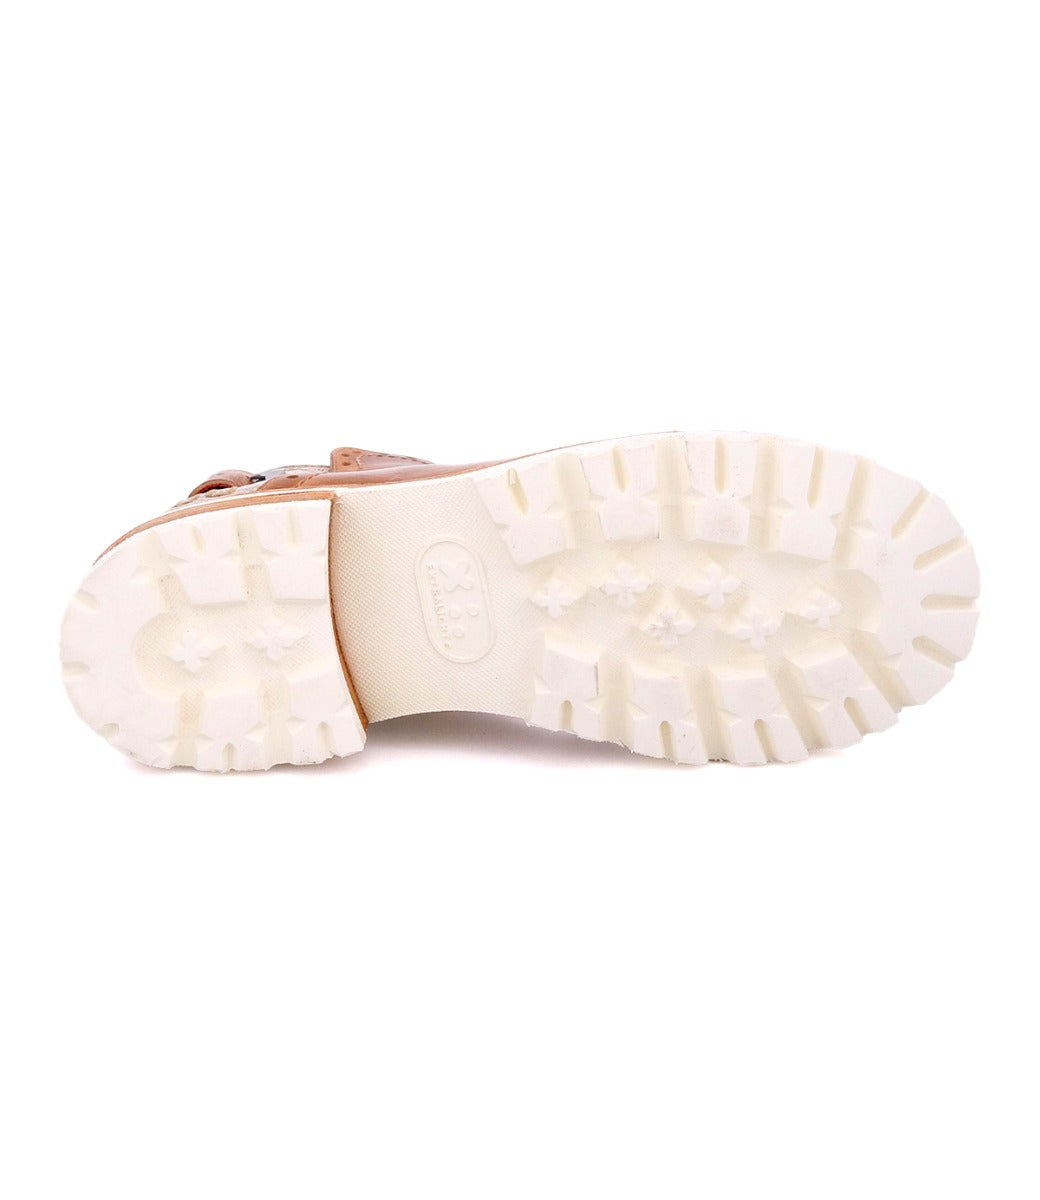 A pair of Brianna shoes with white soles on a white background. Brand: Bed Stu.